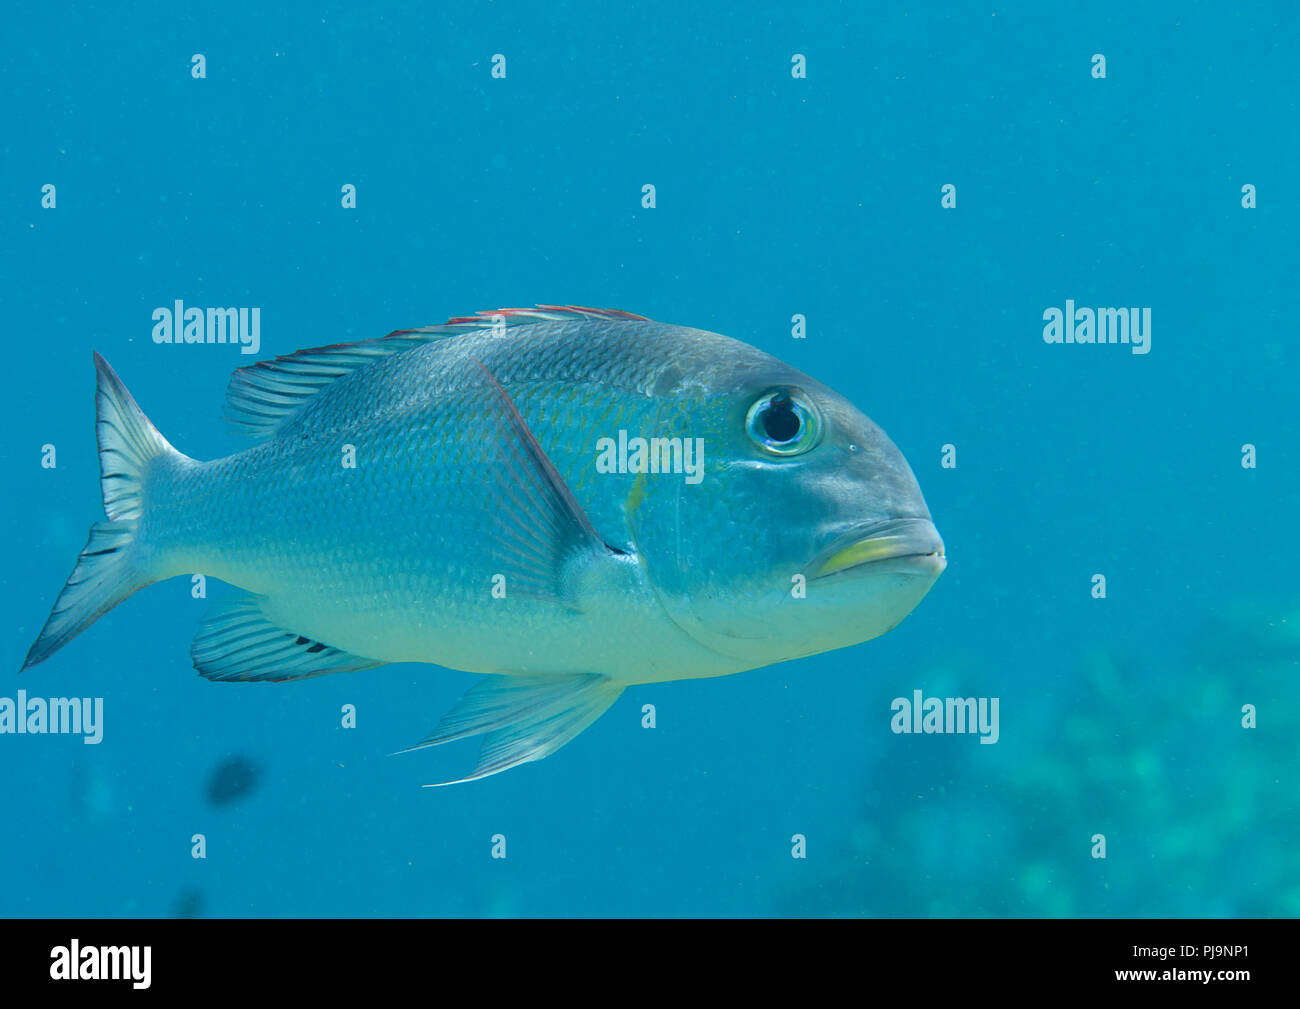 Humpnose big-eye bream (Monotaxis grandoculis)swimming in the water, Bali, Indonesia Stock Photo